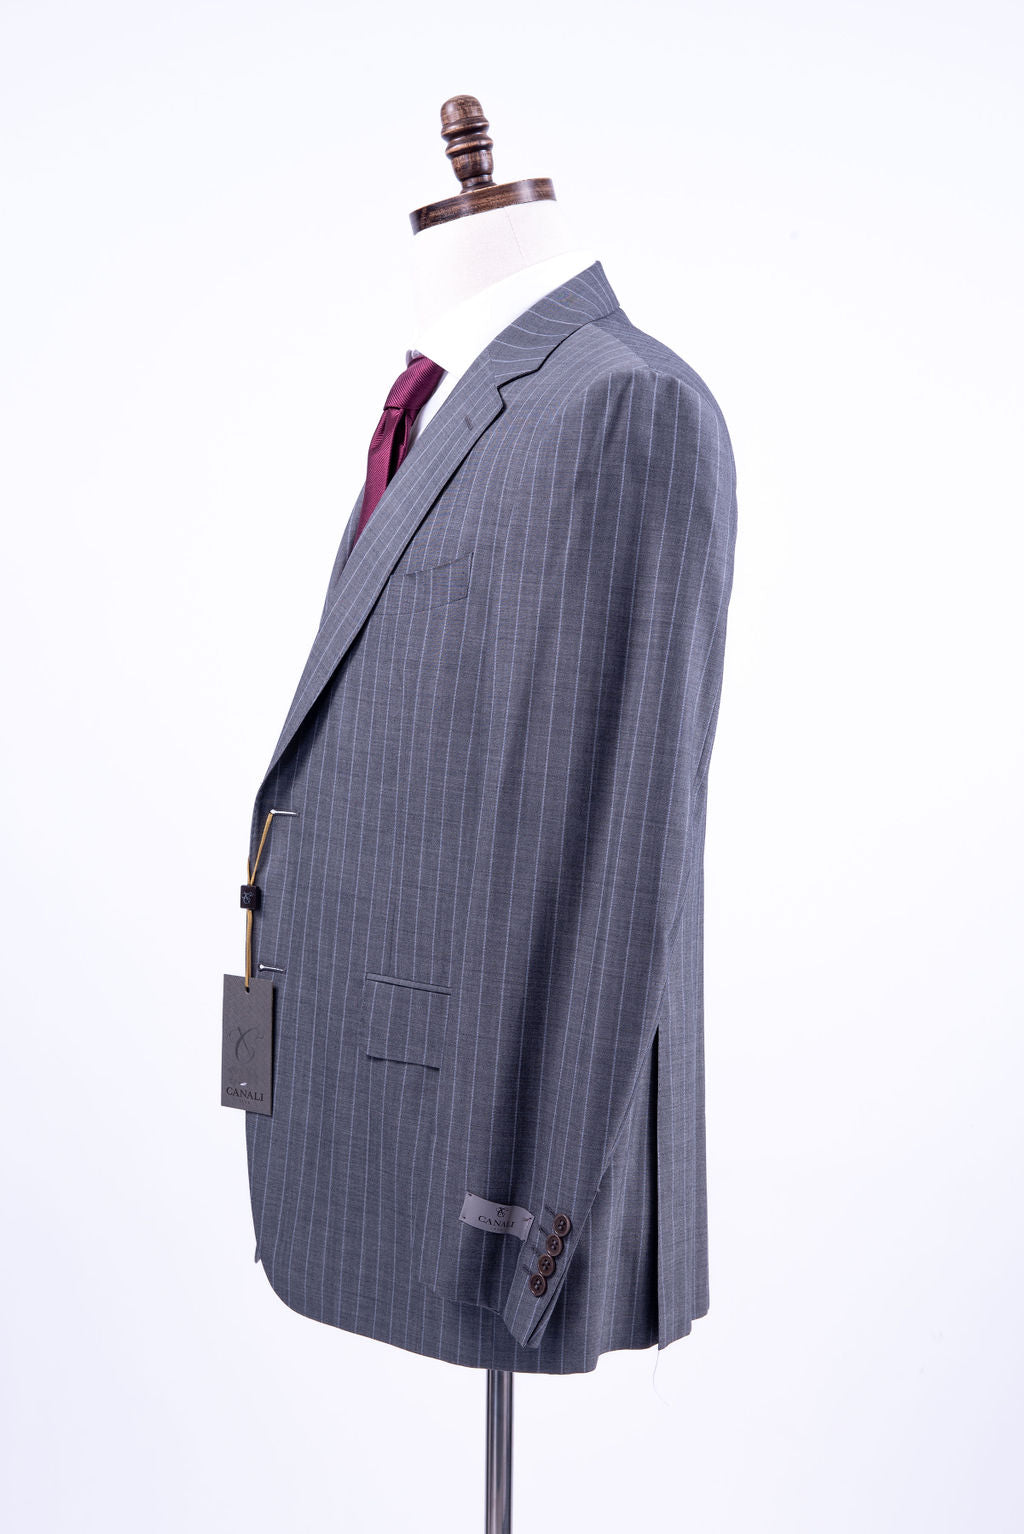 Canali 1934 Mens Gray Pinstriped 42R Drop 6 100% Wool 2 Button 2 Piece Suit